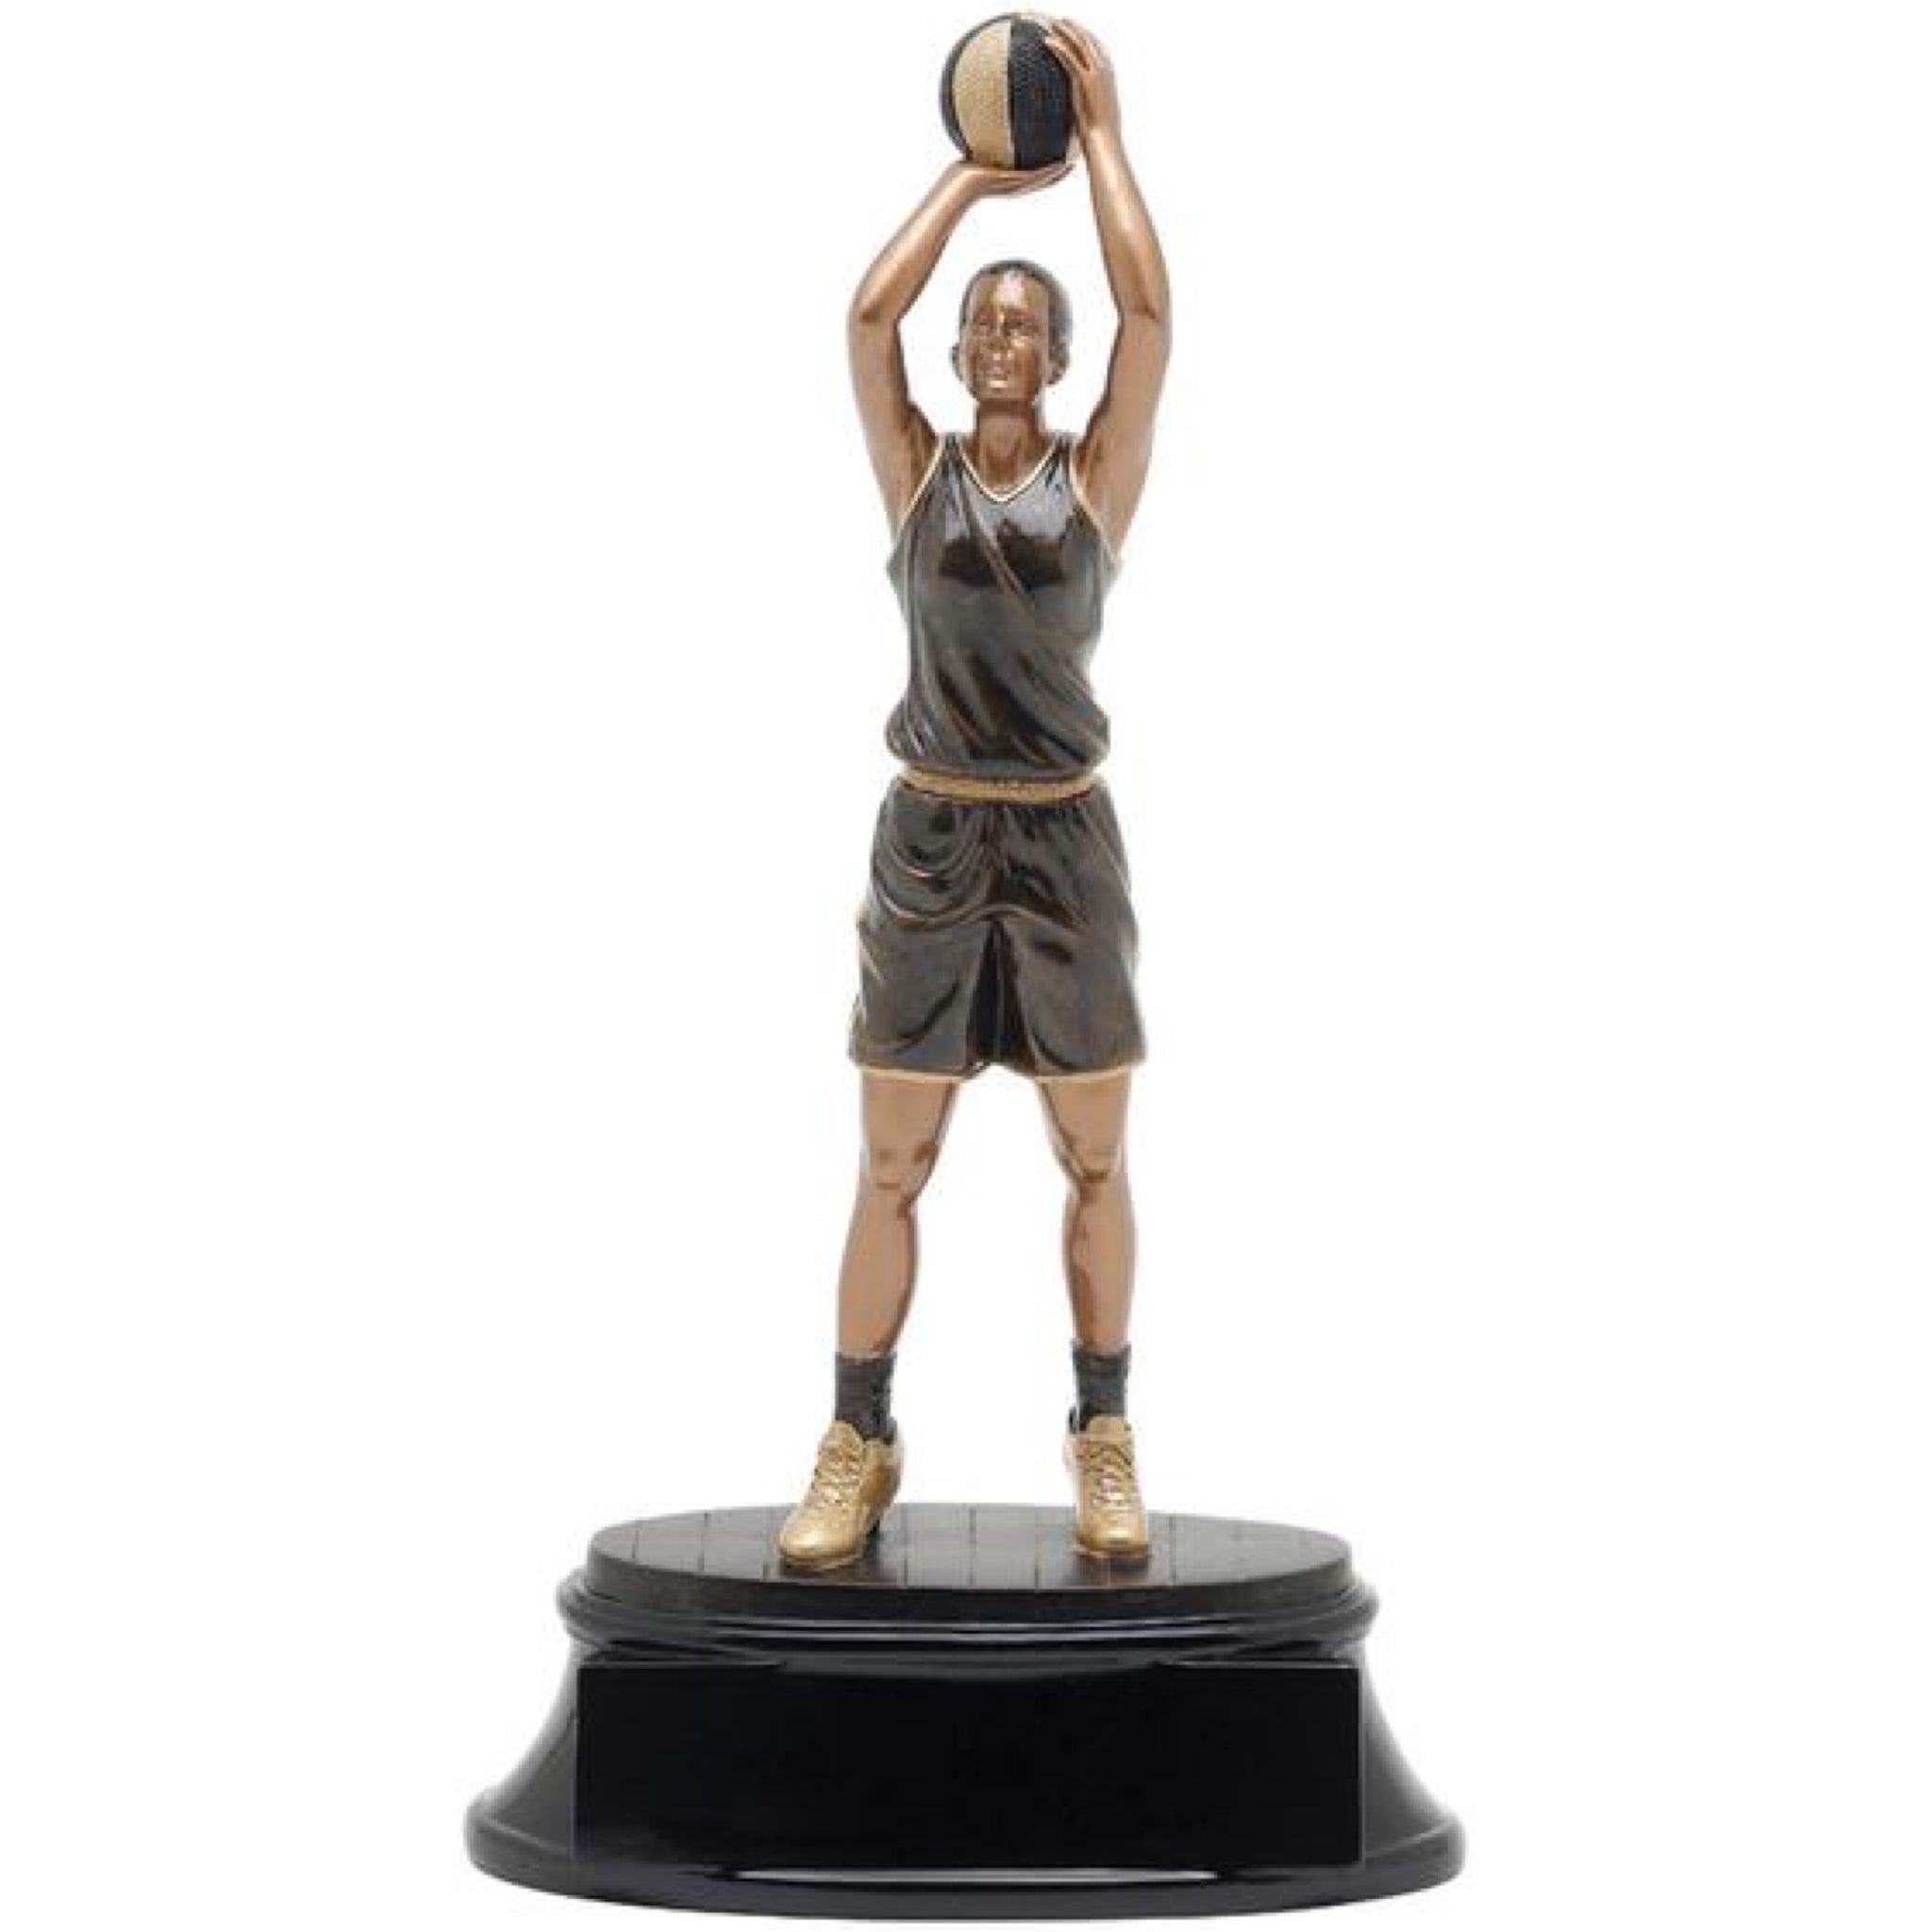 Black and gold basketball trophy featuring an oval shaped base and a female basketball player throwing a jump shot.